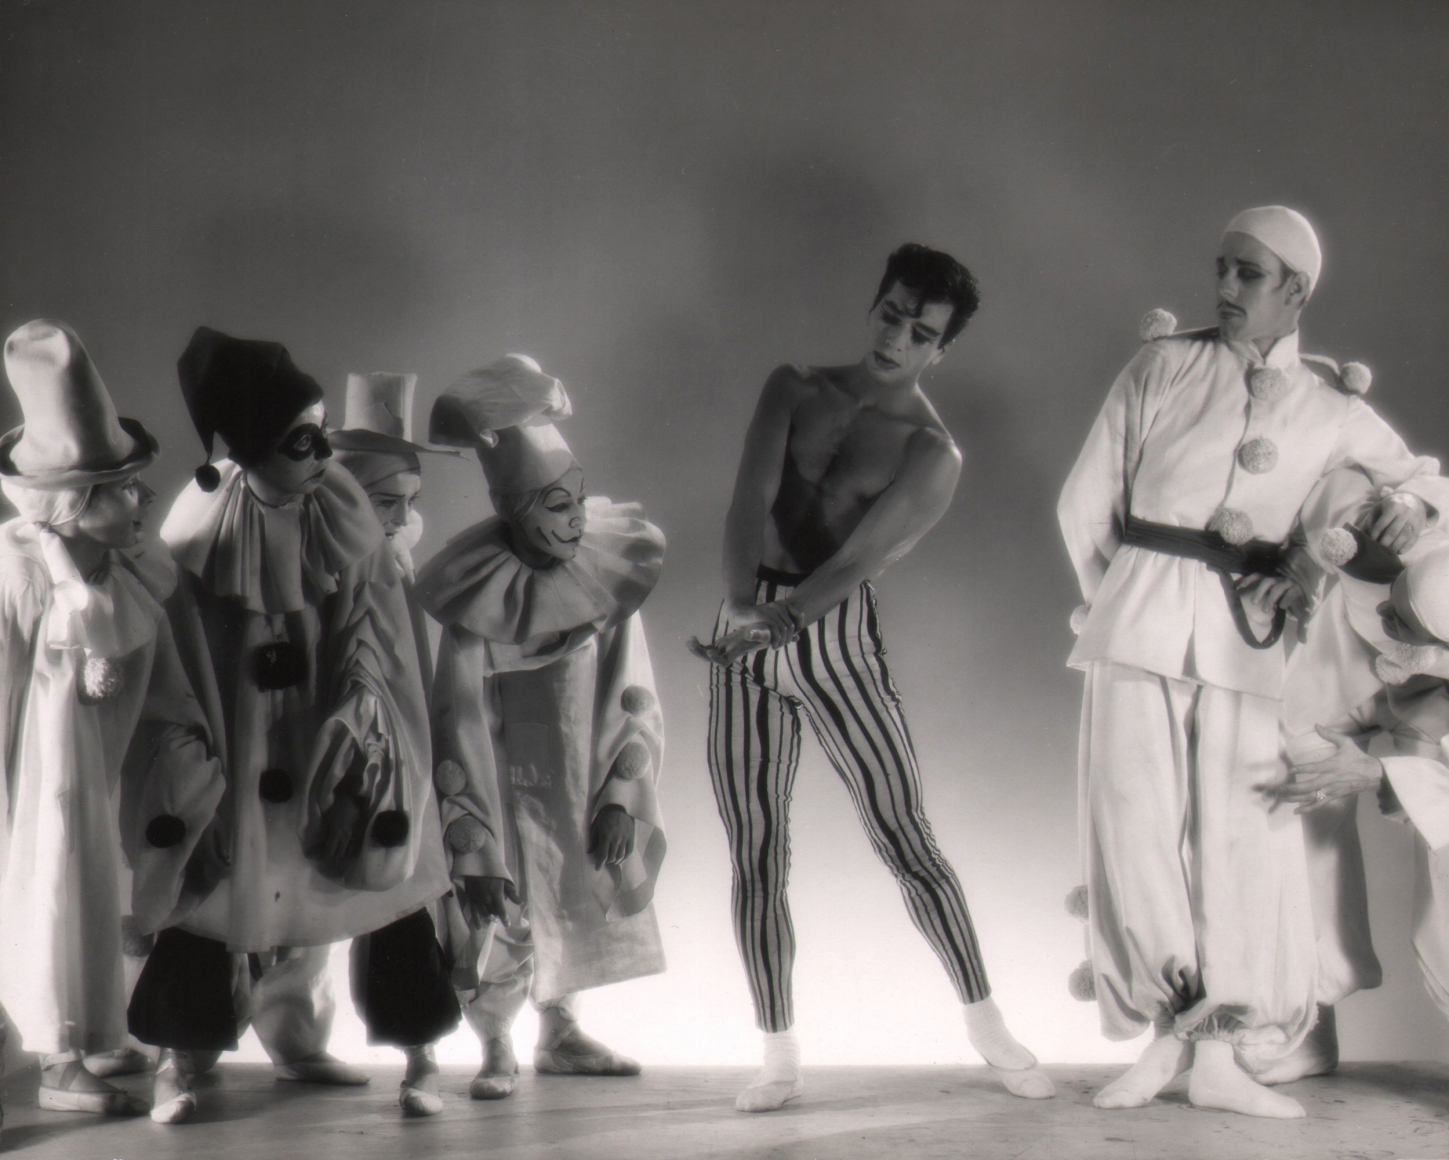 George Platt Lynes, Illumination, Nicholas Magallanes & Brooks Jackson, ​c. 1950. Seven dancers pose in clown costumes. All looking to the central shirtless male figure.